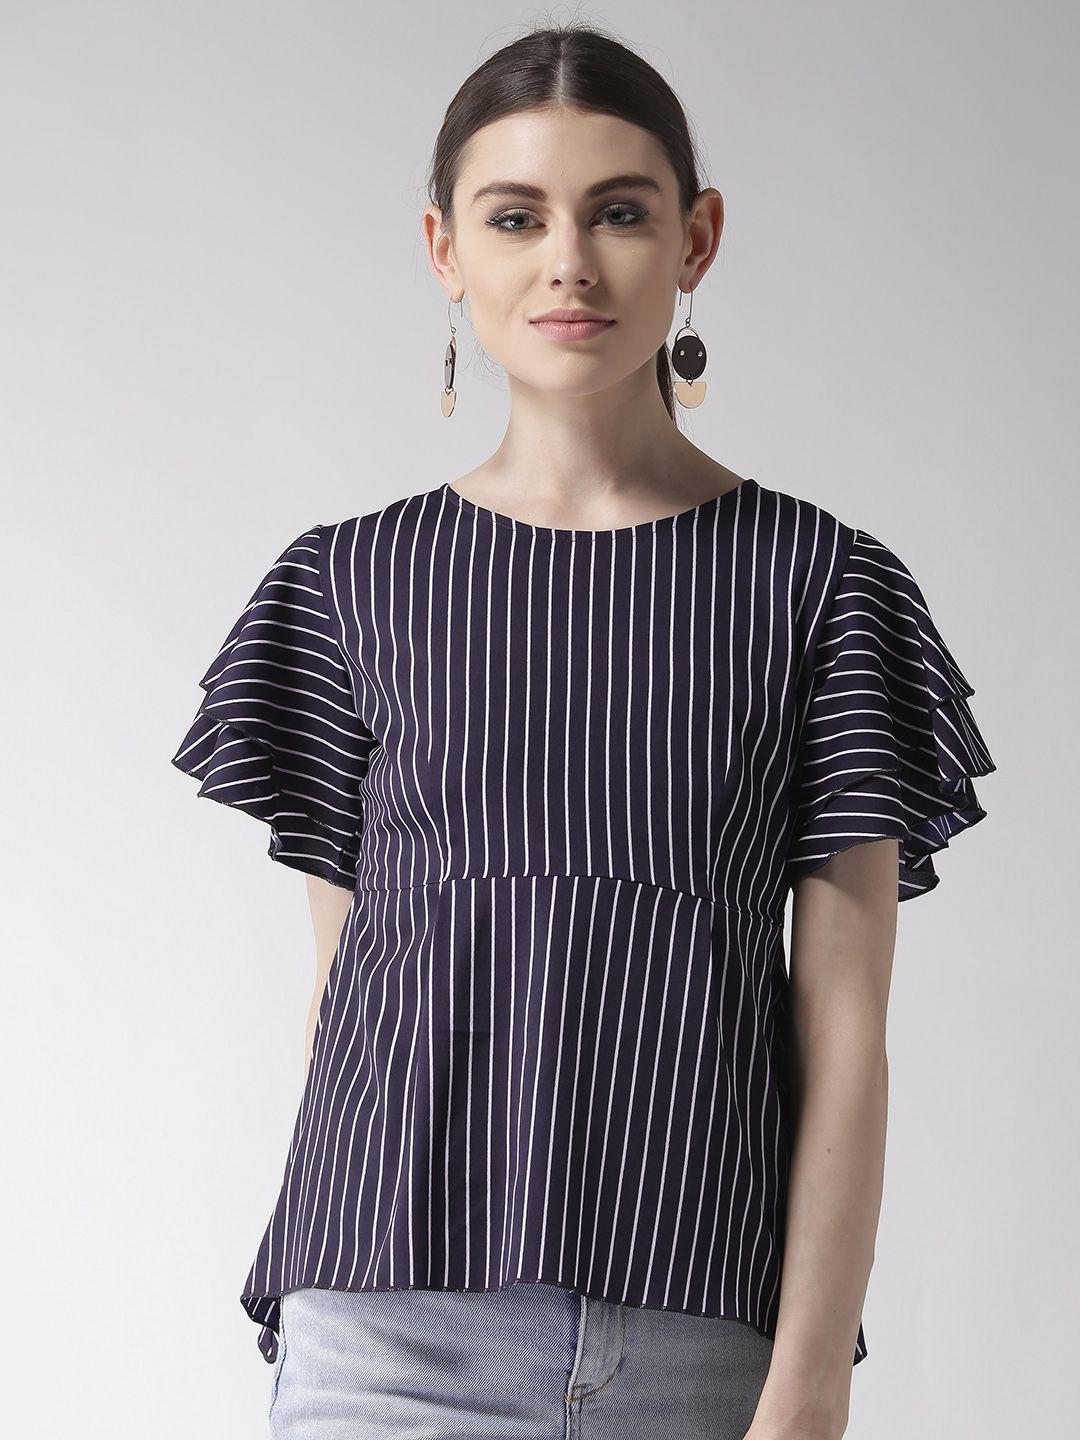 style-quotient-women-navy-blue-&-white-striped-a-line-top